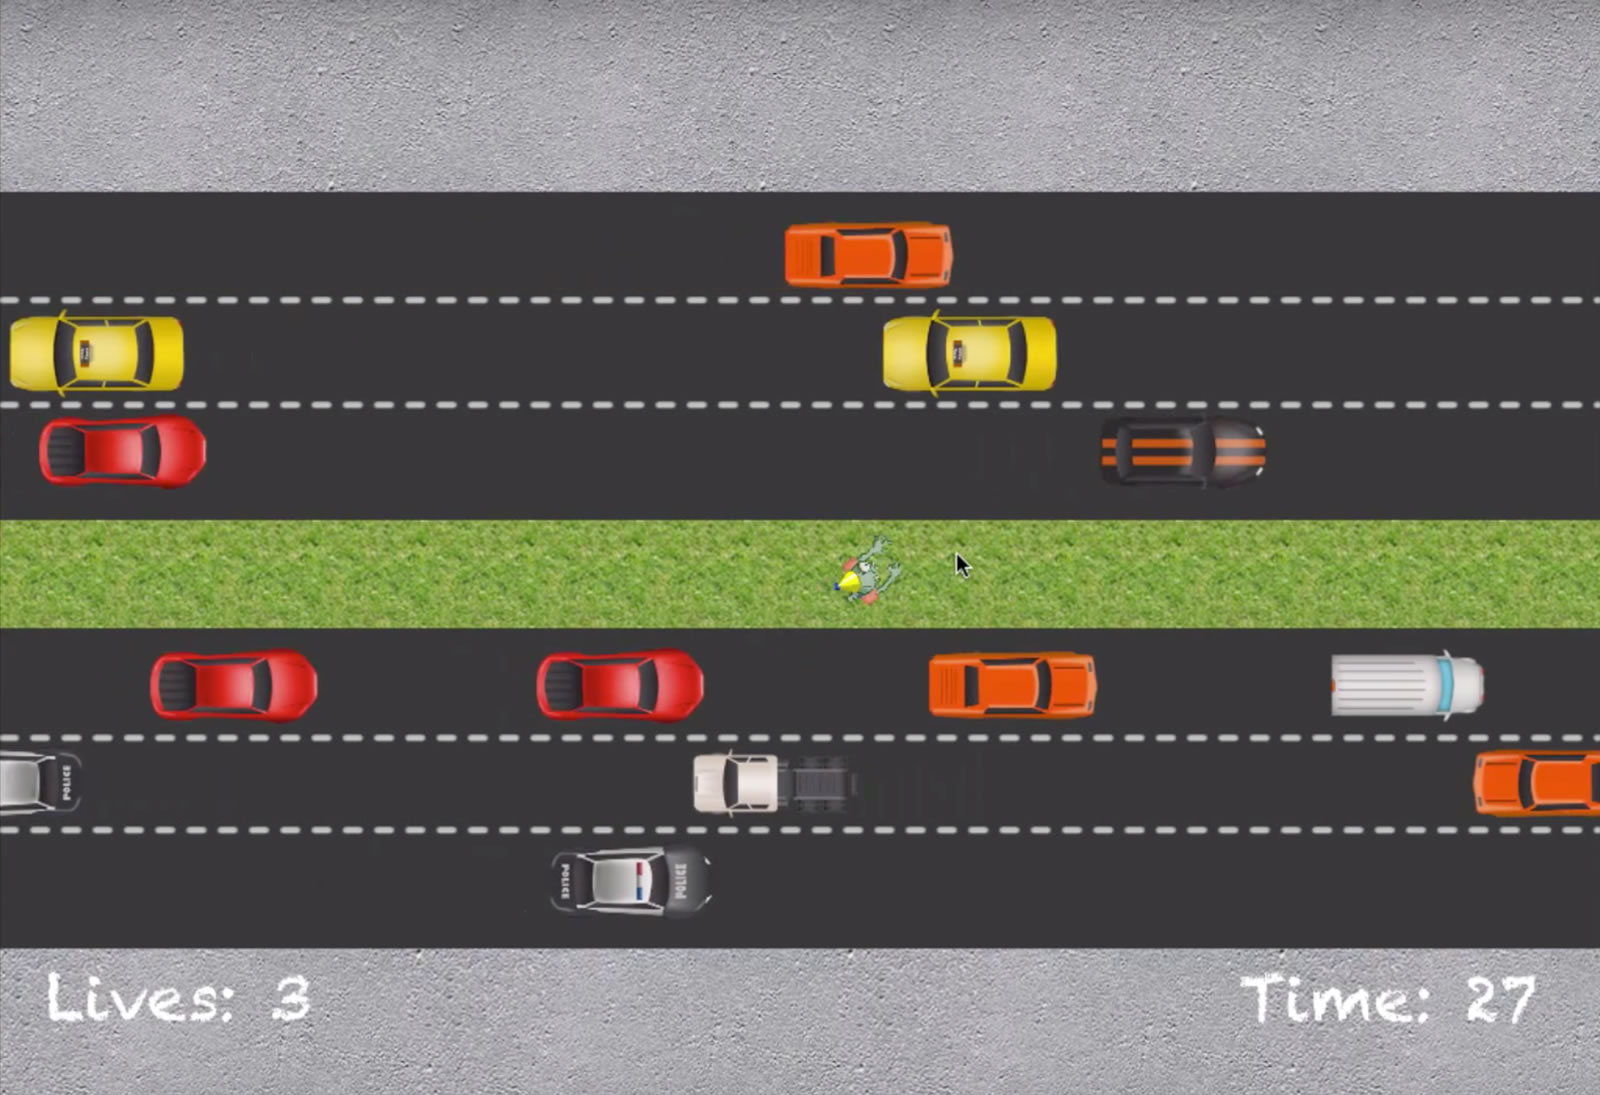 Pulling my old “Frogger / Crossy Road”-style game out of mothballs